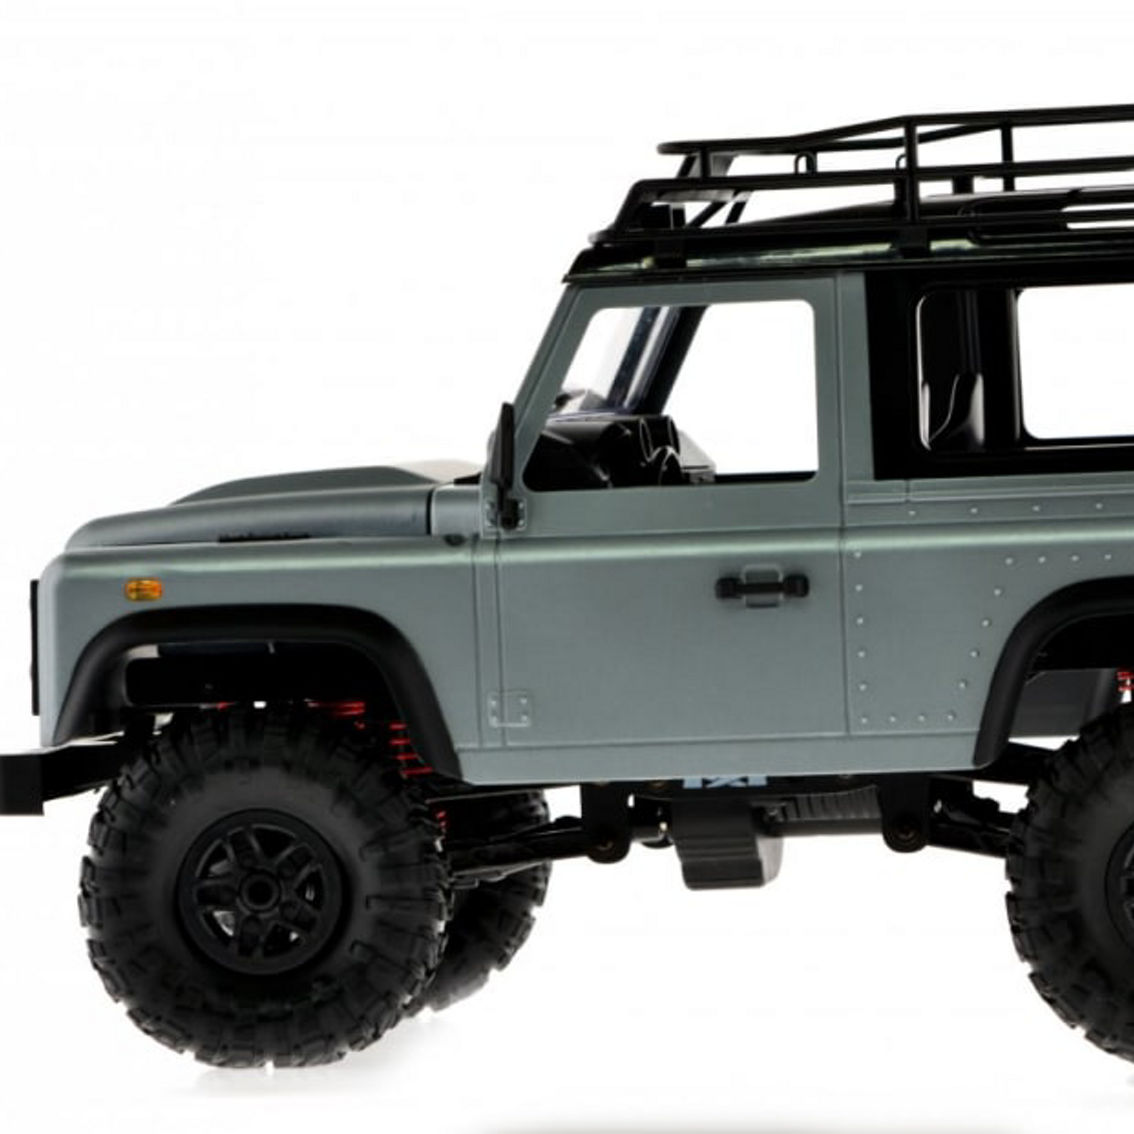 W09602-G 1:10 scale licensed Land Rover truck - Gray - Image 3 of 5